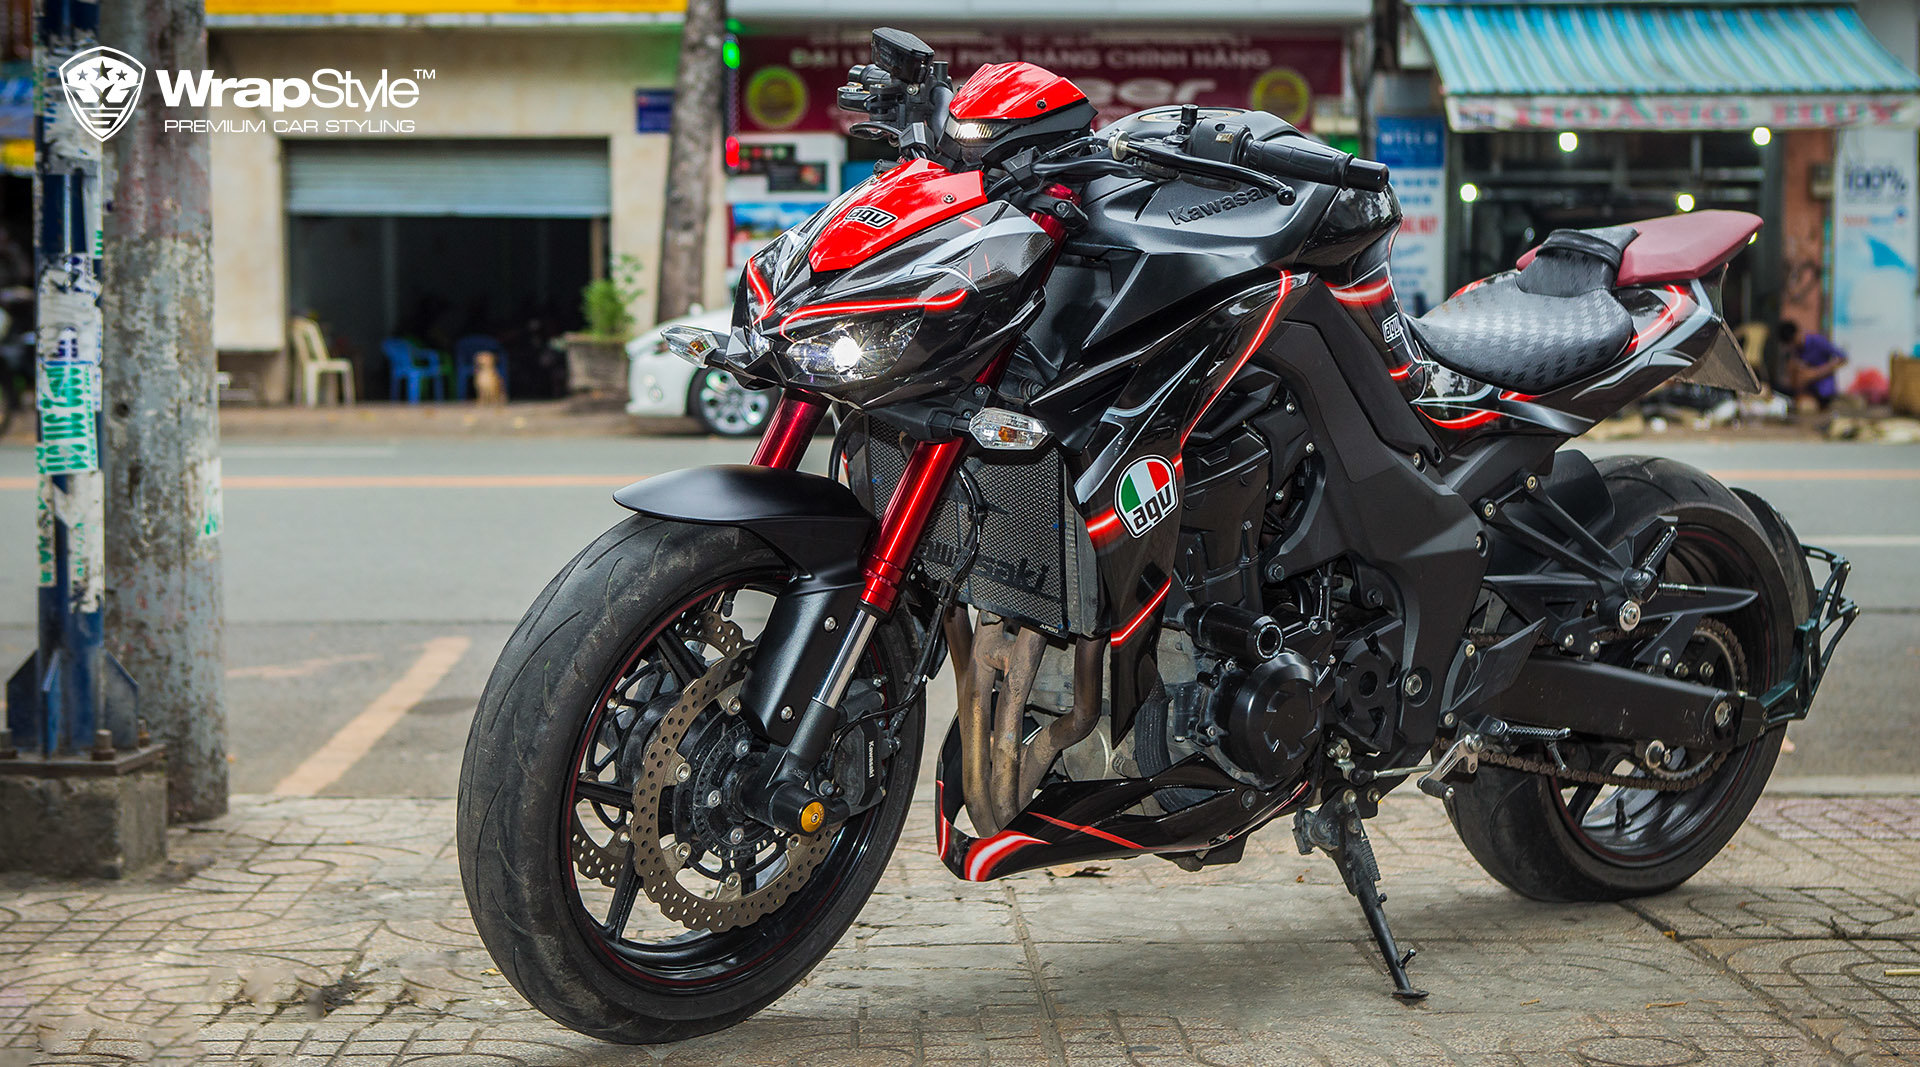 Z1000 - Red Detailing design | WrapStyle